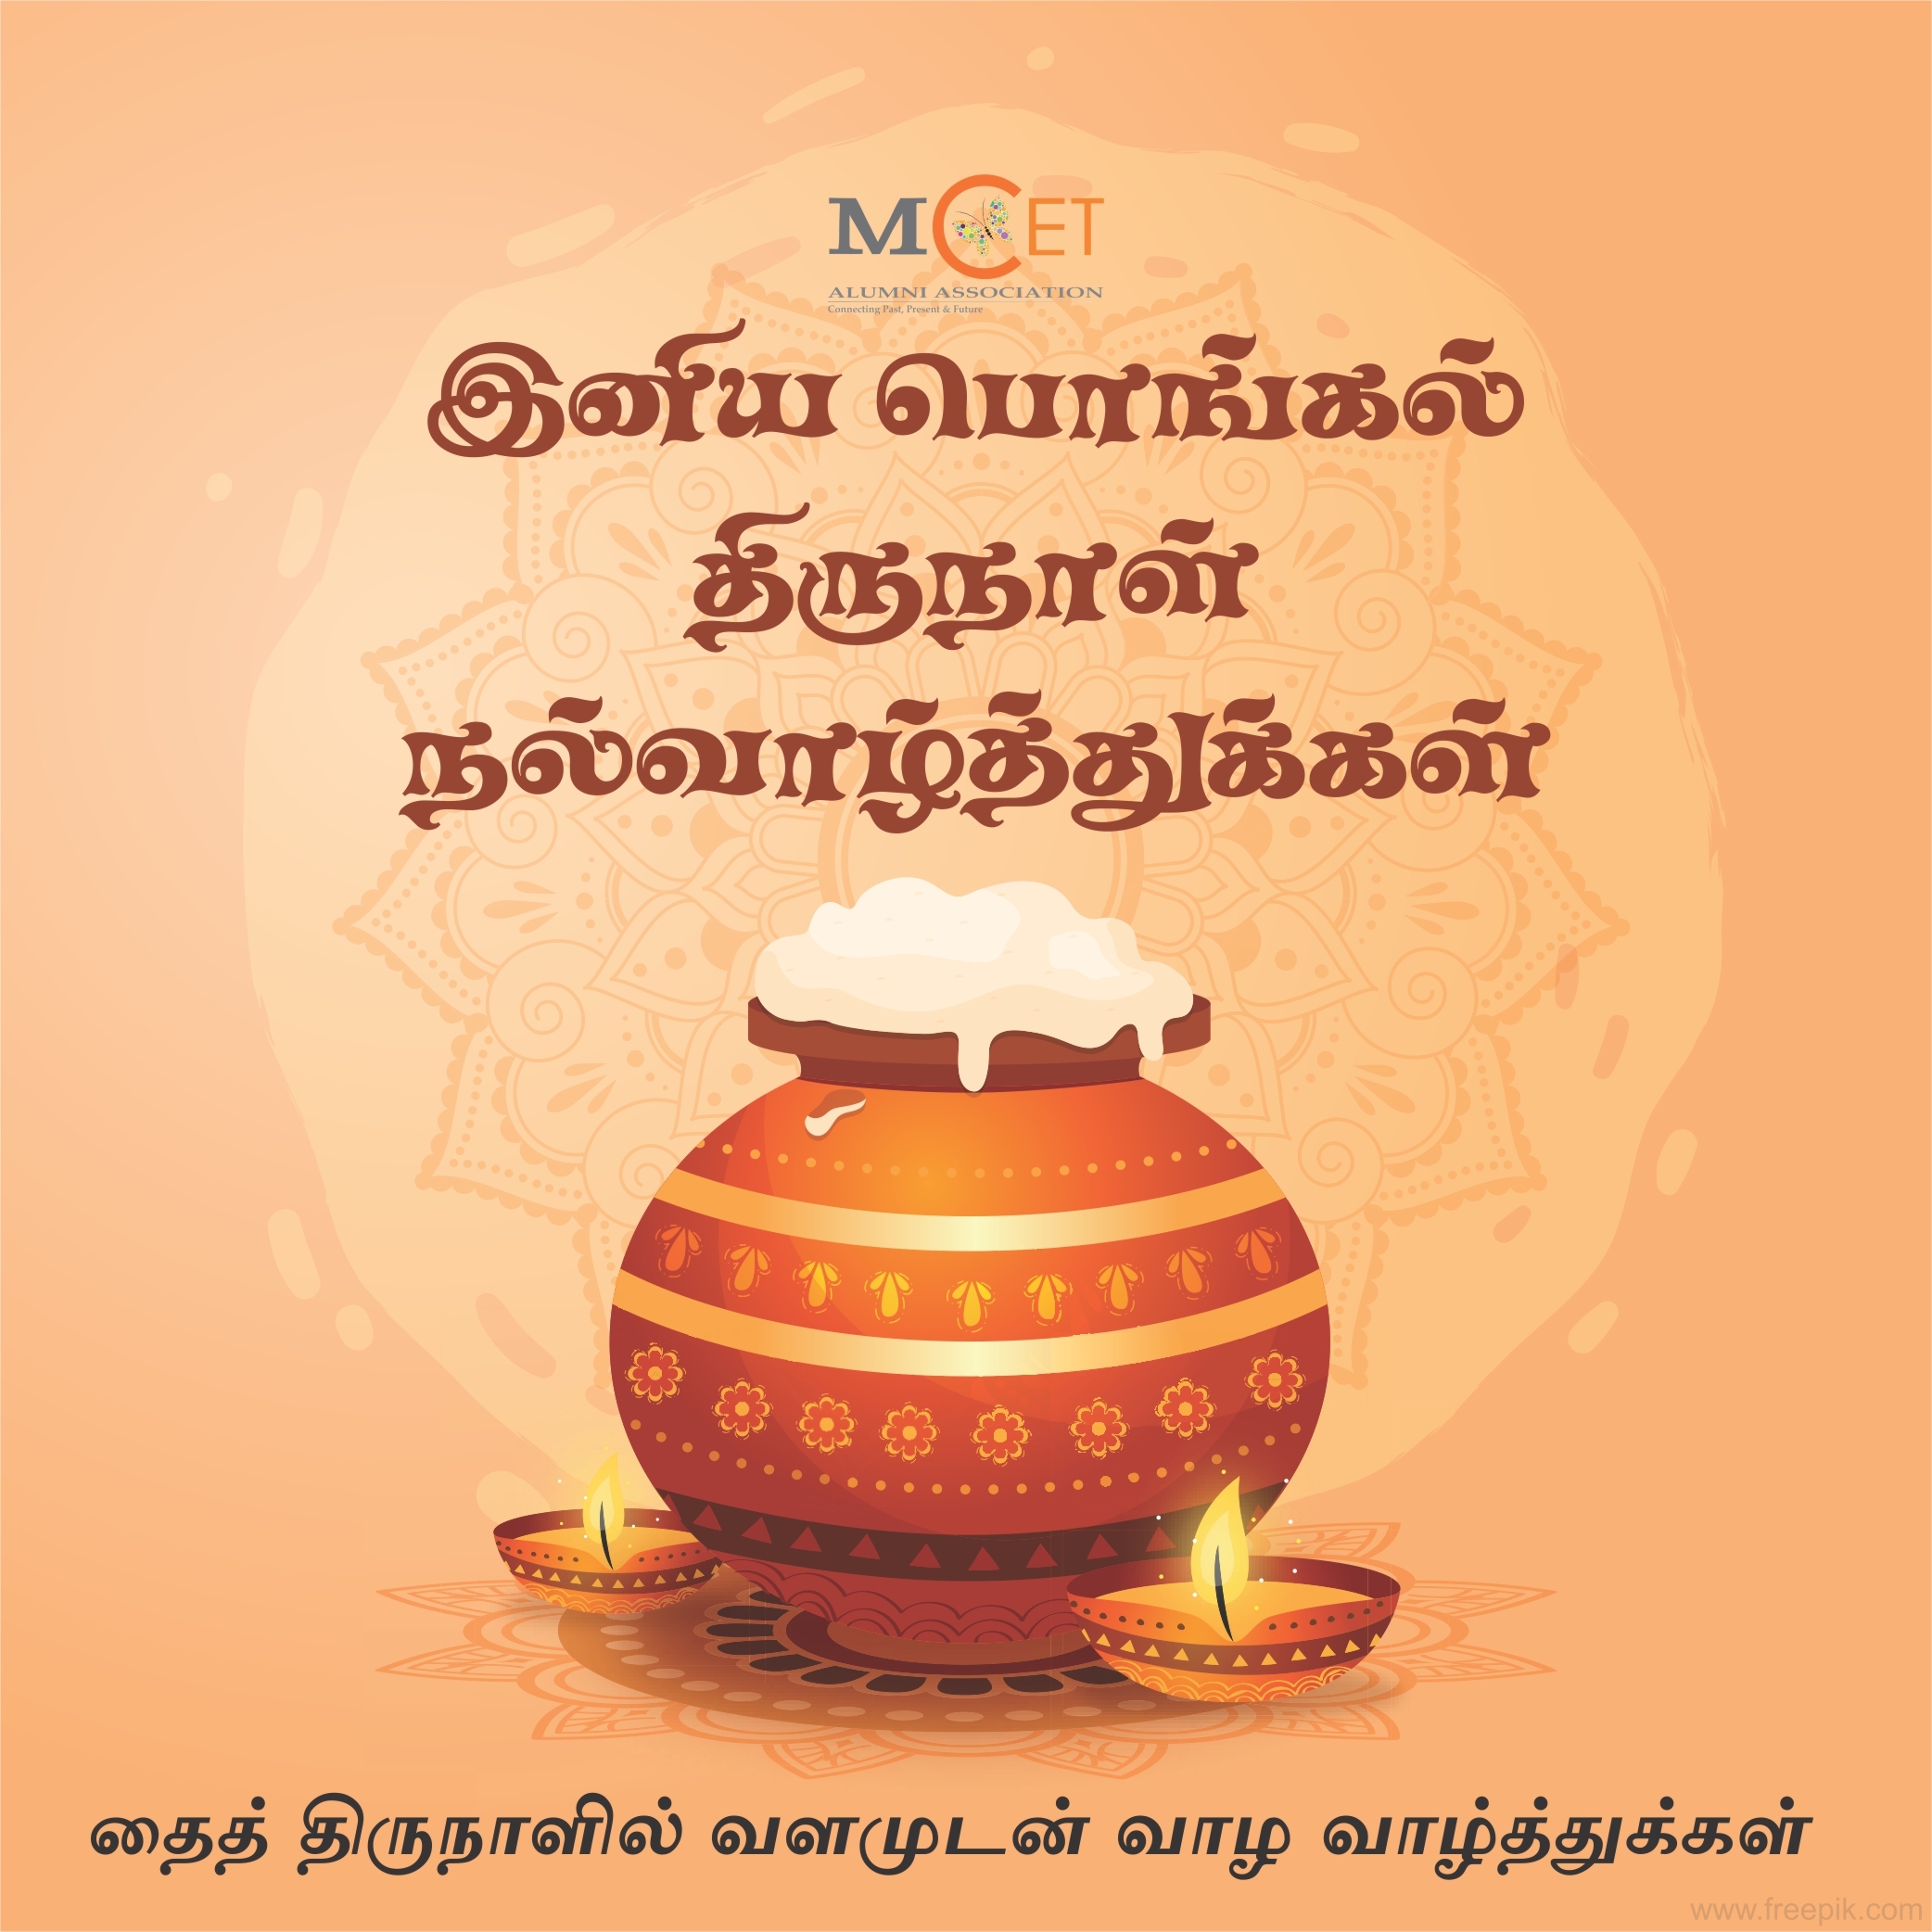 Wishing you a happy pongal festival